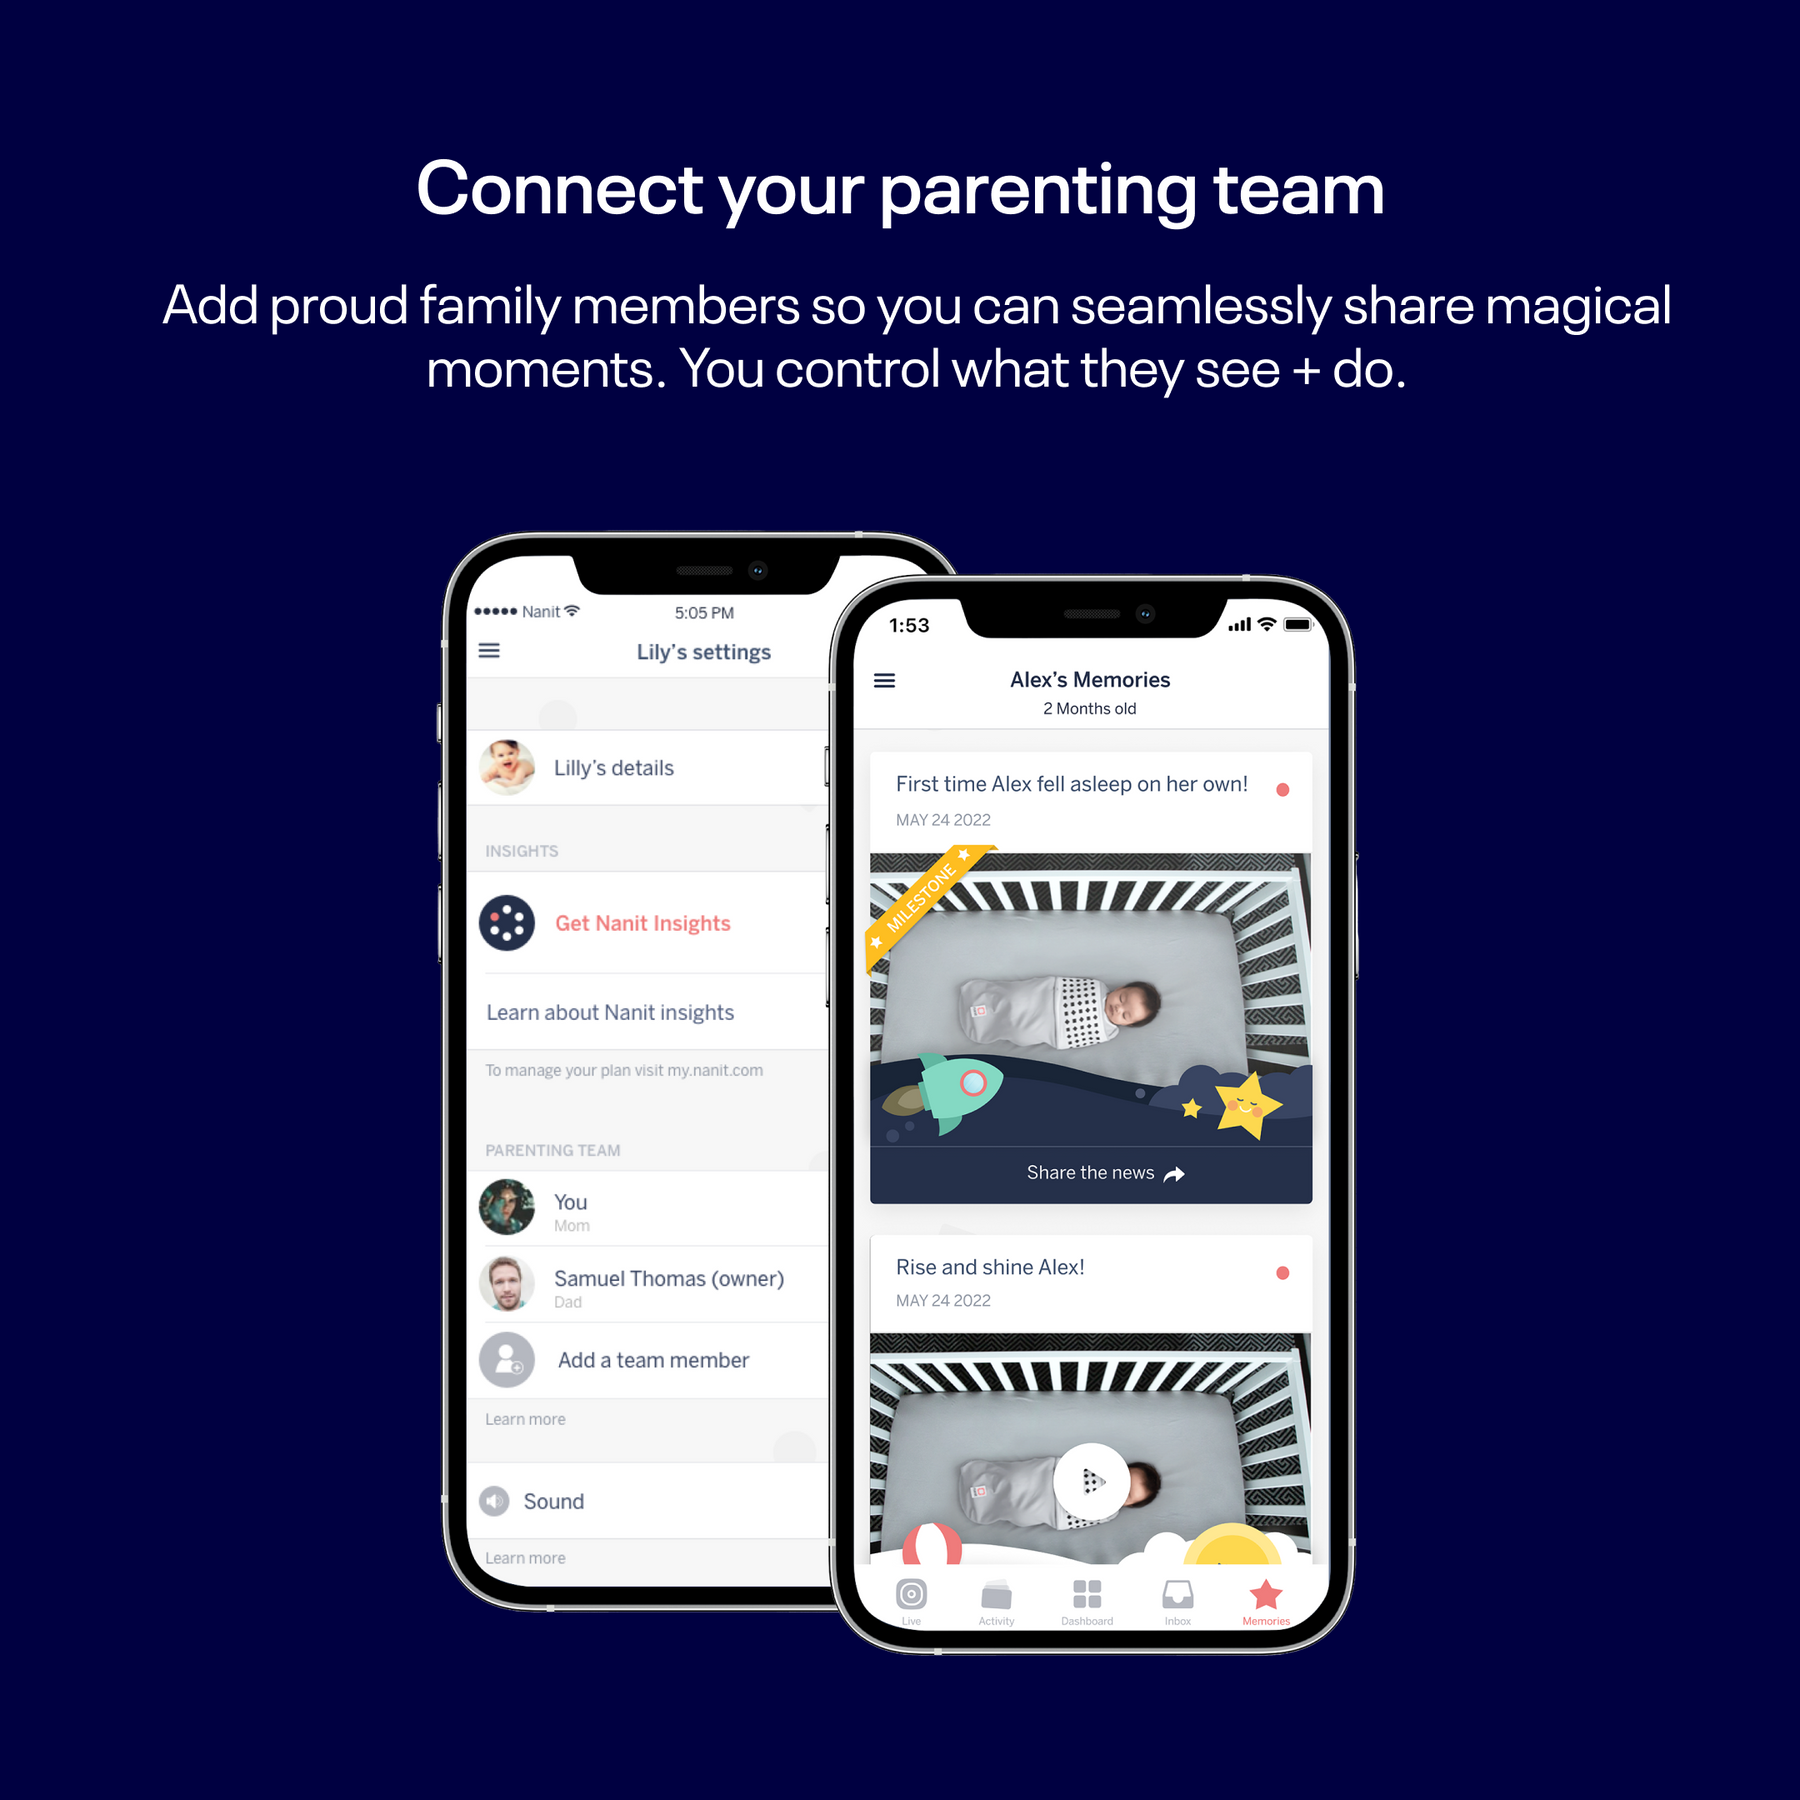 Connect your parenting team - add family members so you can seamlessly share magical moments. You control what they see + do.